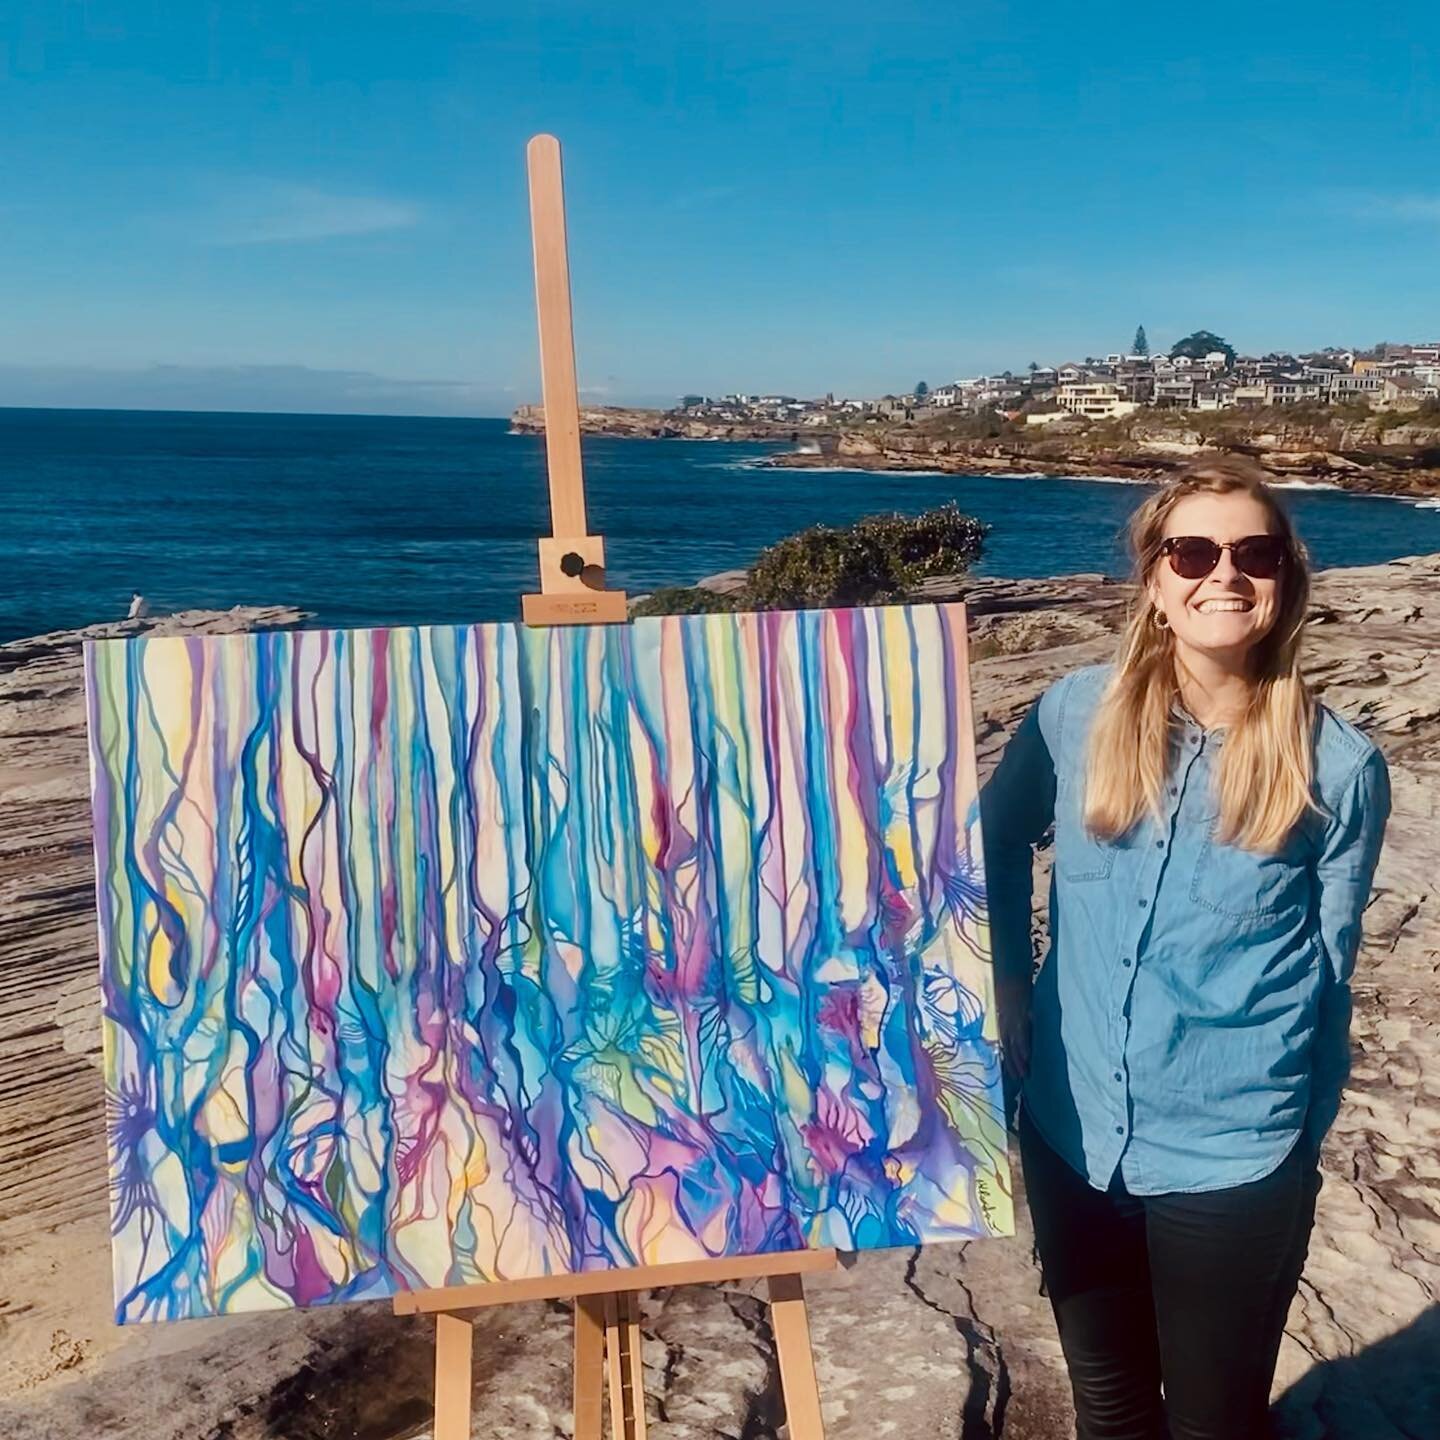 I&rsquo;m on Coogee Cliffs 
With my new favourite painting 
Smiling in the sun ☀️ 
.
A Sunday Haiku 〰️
.
.
.
#sunday #painting #art #artist #landscape #landscapepainting #ocean #sea #waves
#blues #pink #purple #palette #abstract #abstractart #colour 